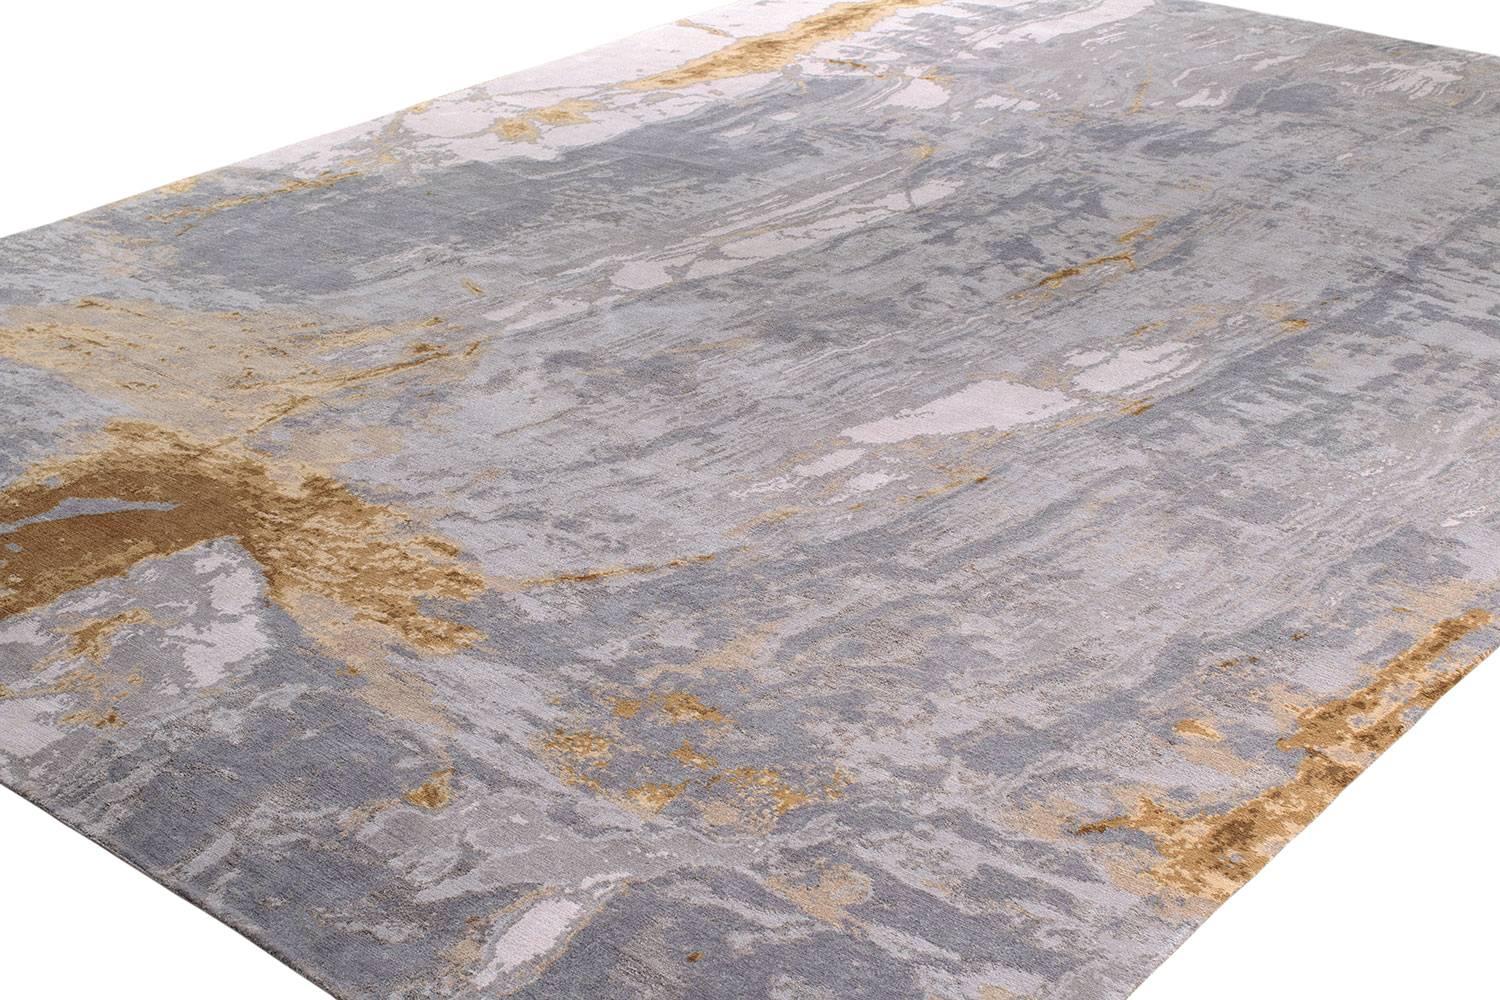 Taking inspiration from slabs of stone, the design focus quickly turned to the color. Dakota has an organic movement throughout, the use of cool colors with hints of gold accents pulls that movement out. The subtle colors uncover themselves over